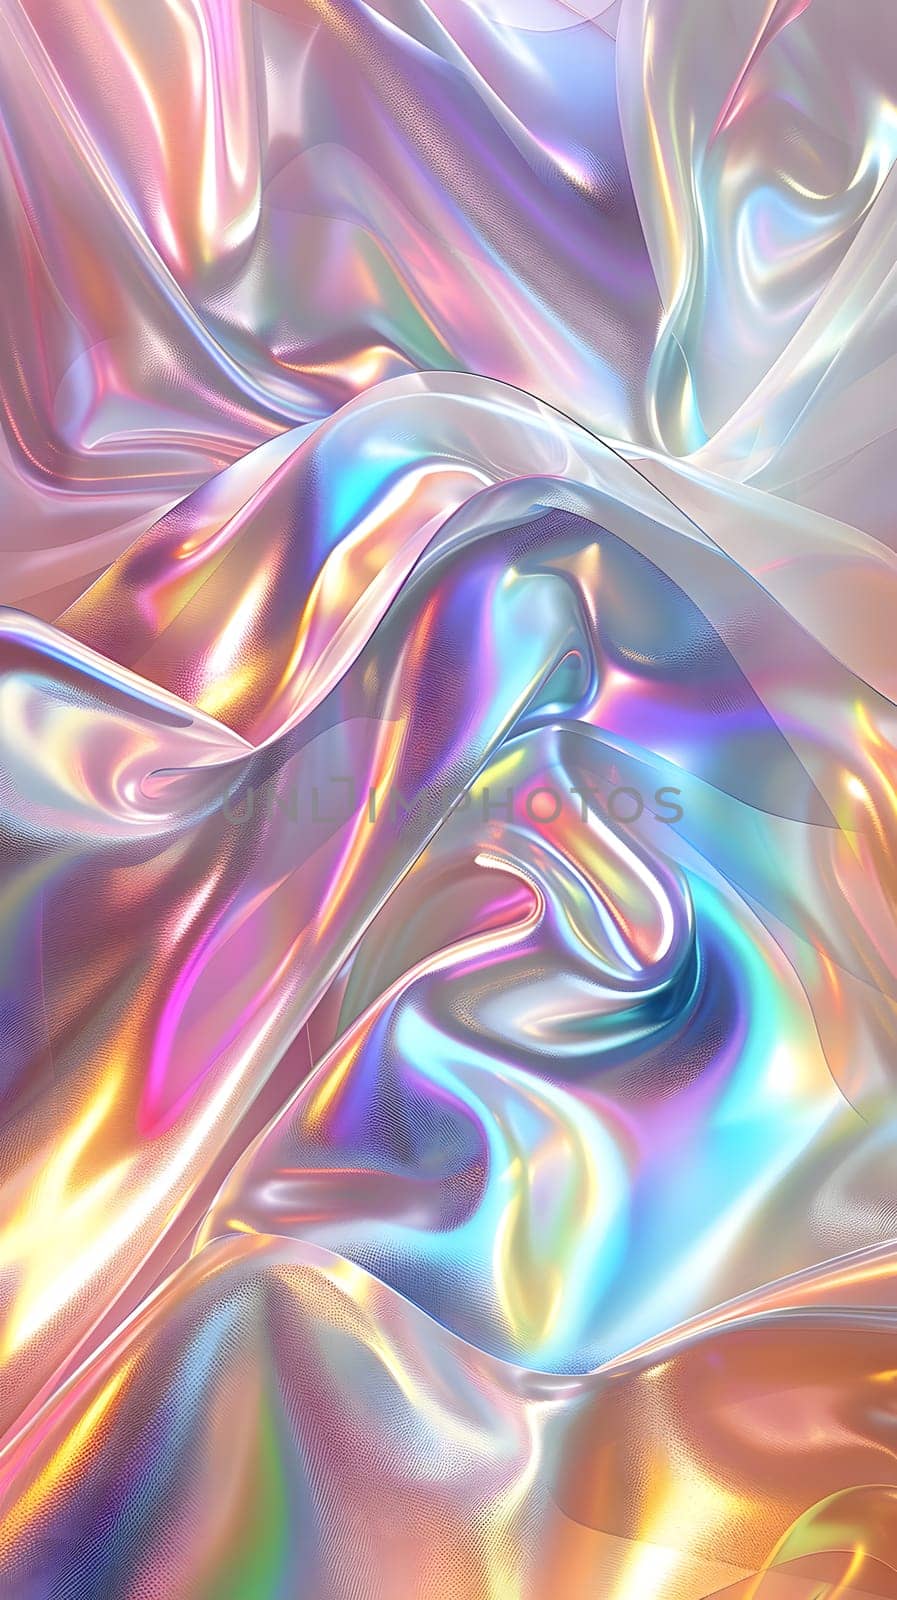 A closeup of holographic fabric featuring a rainbow of colors including magenta, purple, violet, and electric blue. The intricate pattern resembles a vibrant painting in visual arts